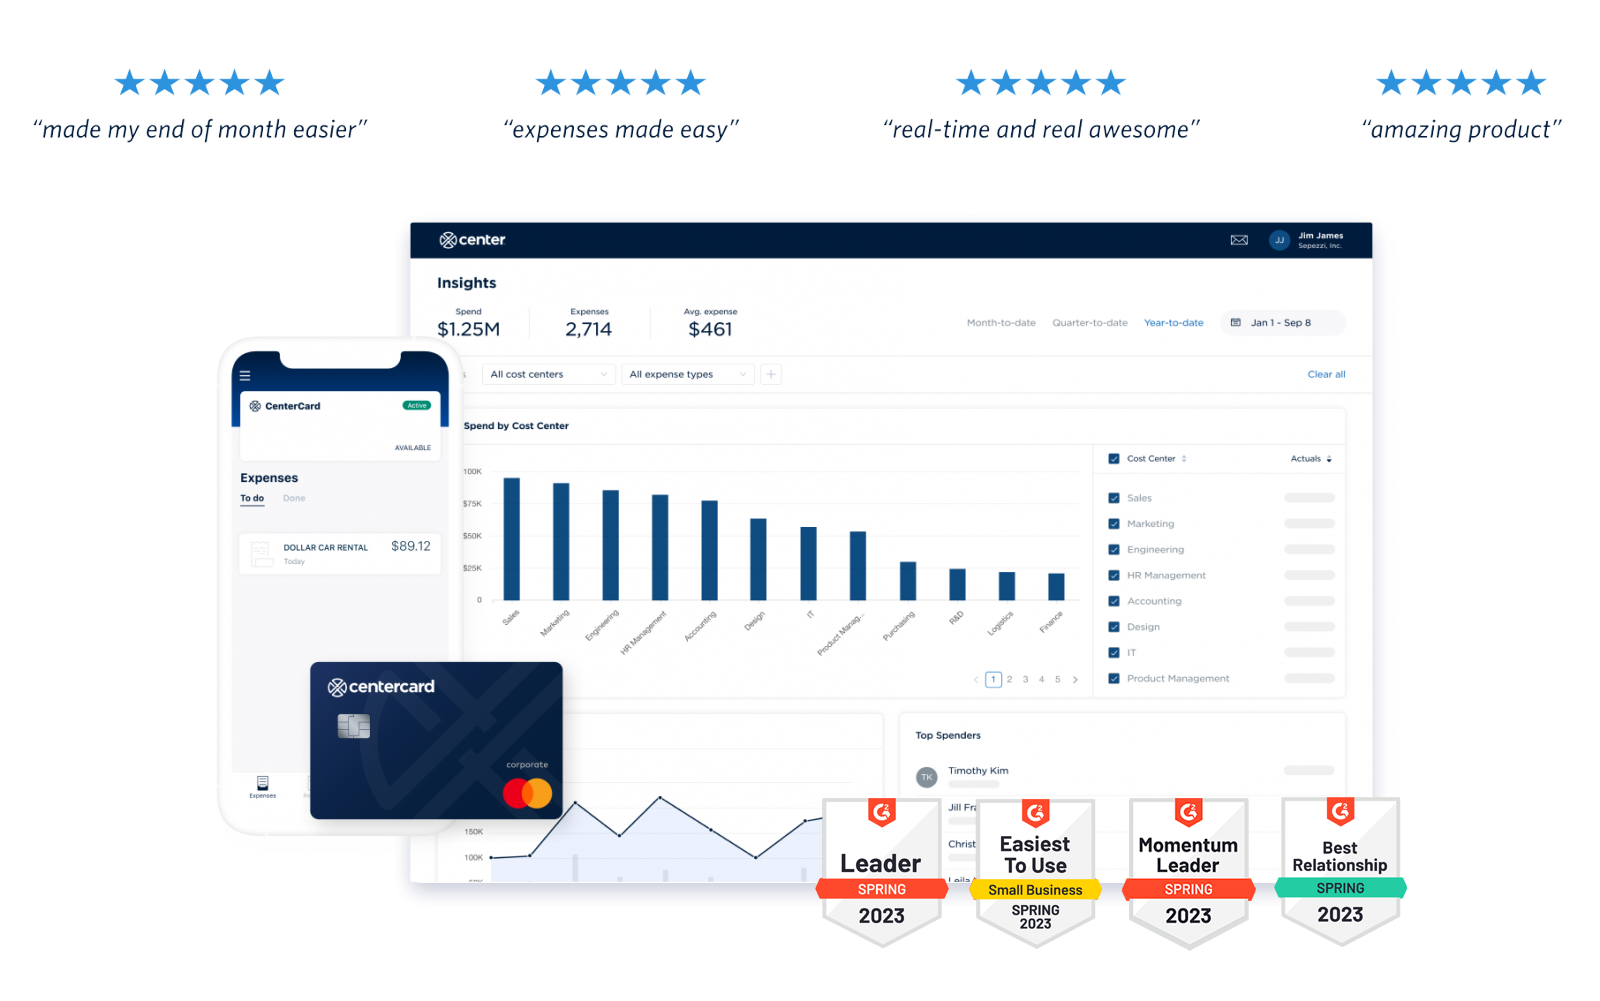 Screenshots of Center on desktop and mobile with G2 badges and customer quotes saying "made my end of month easier", "expenses made easy", "real-time and real awesome", and "amazing product".